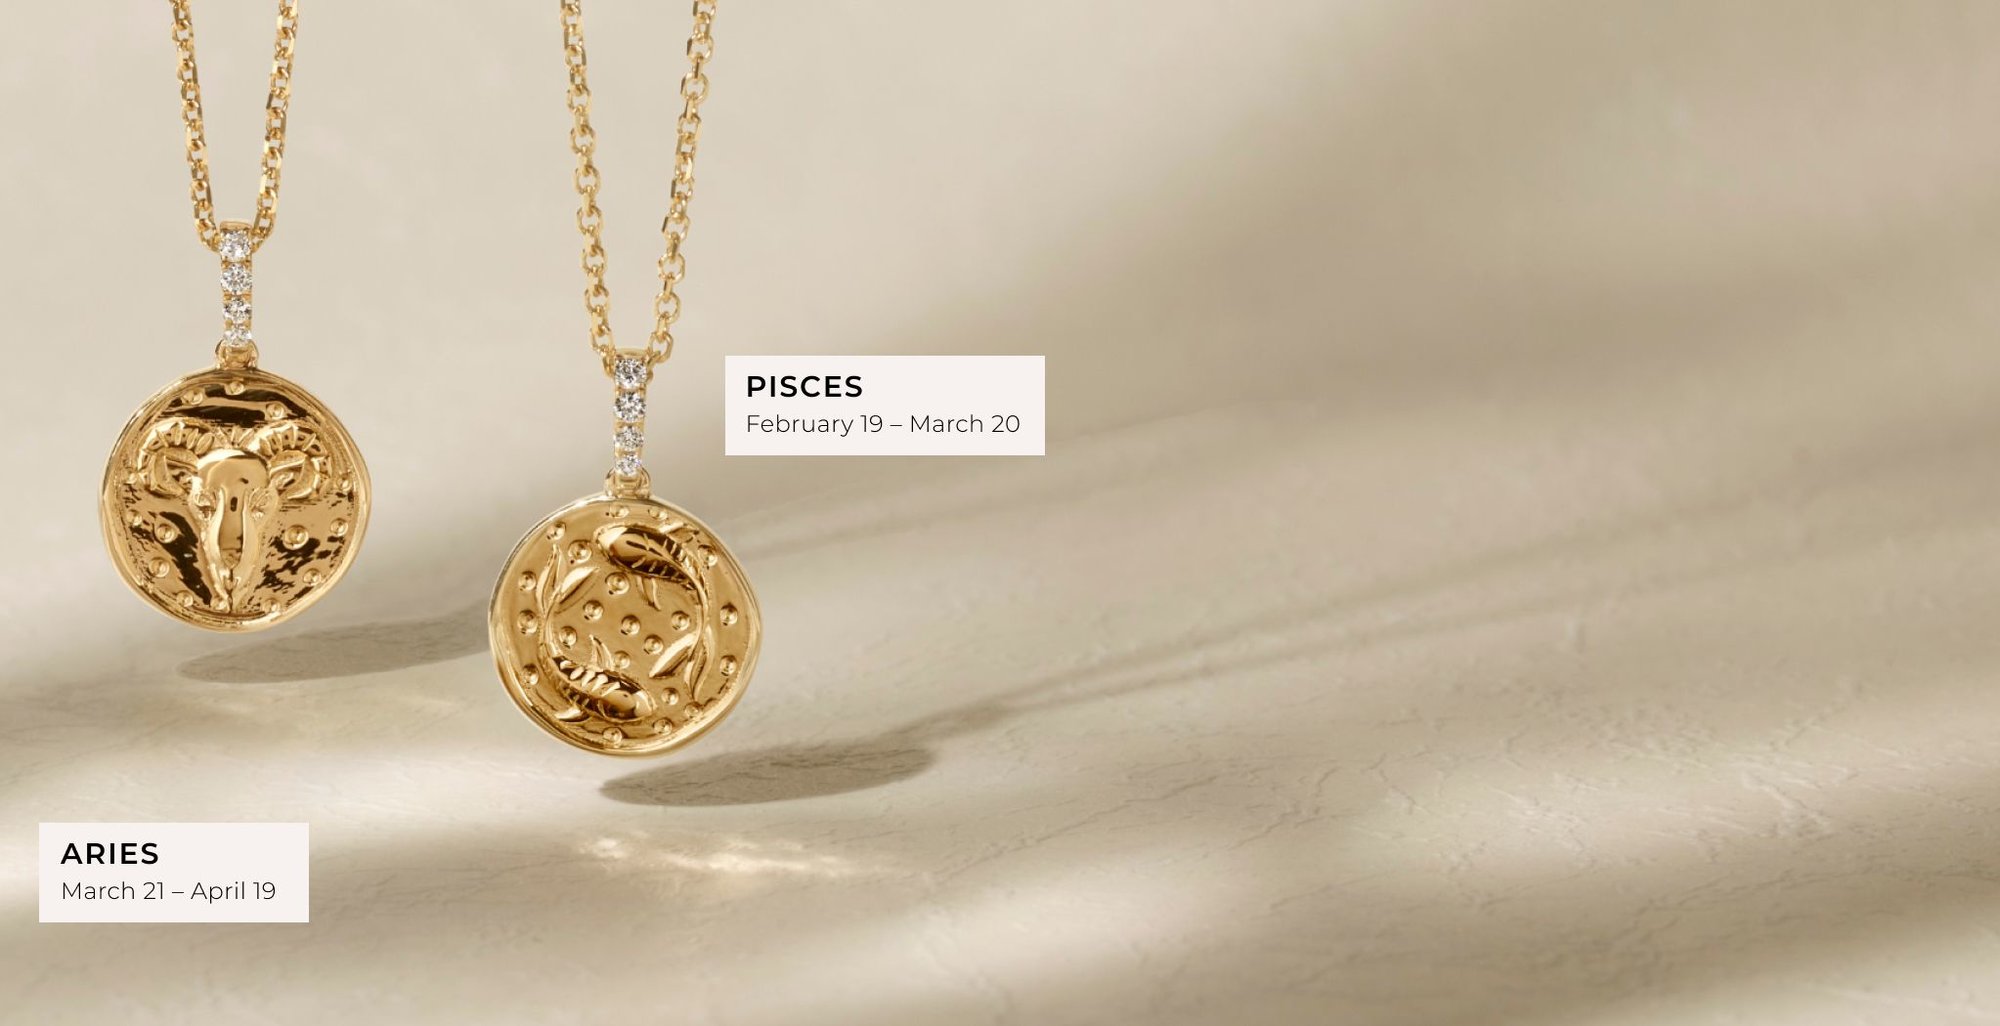 An Aries and a Pisces zodiac pendant